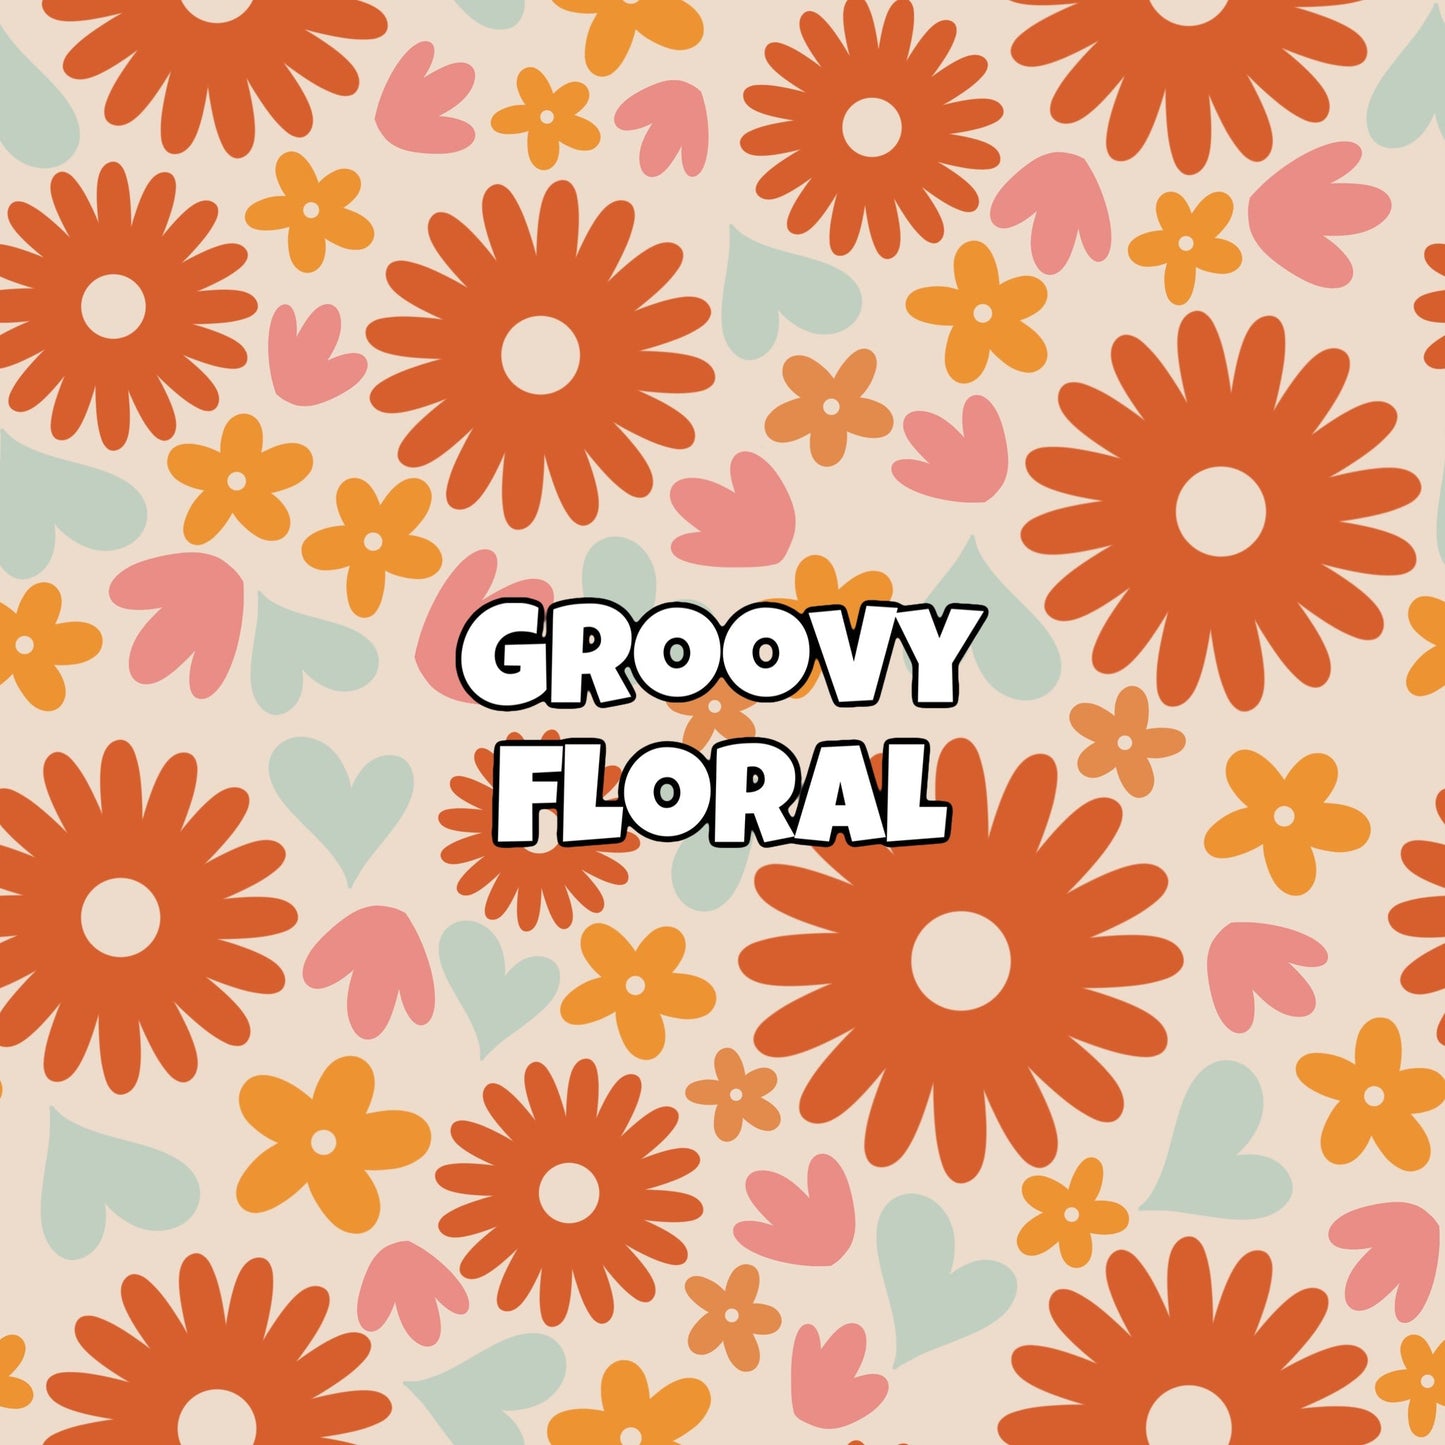 GROOVY FLORAL